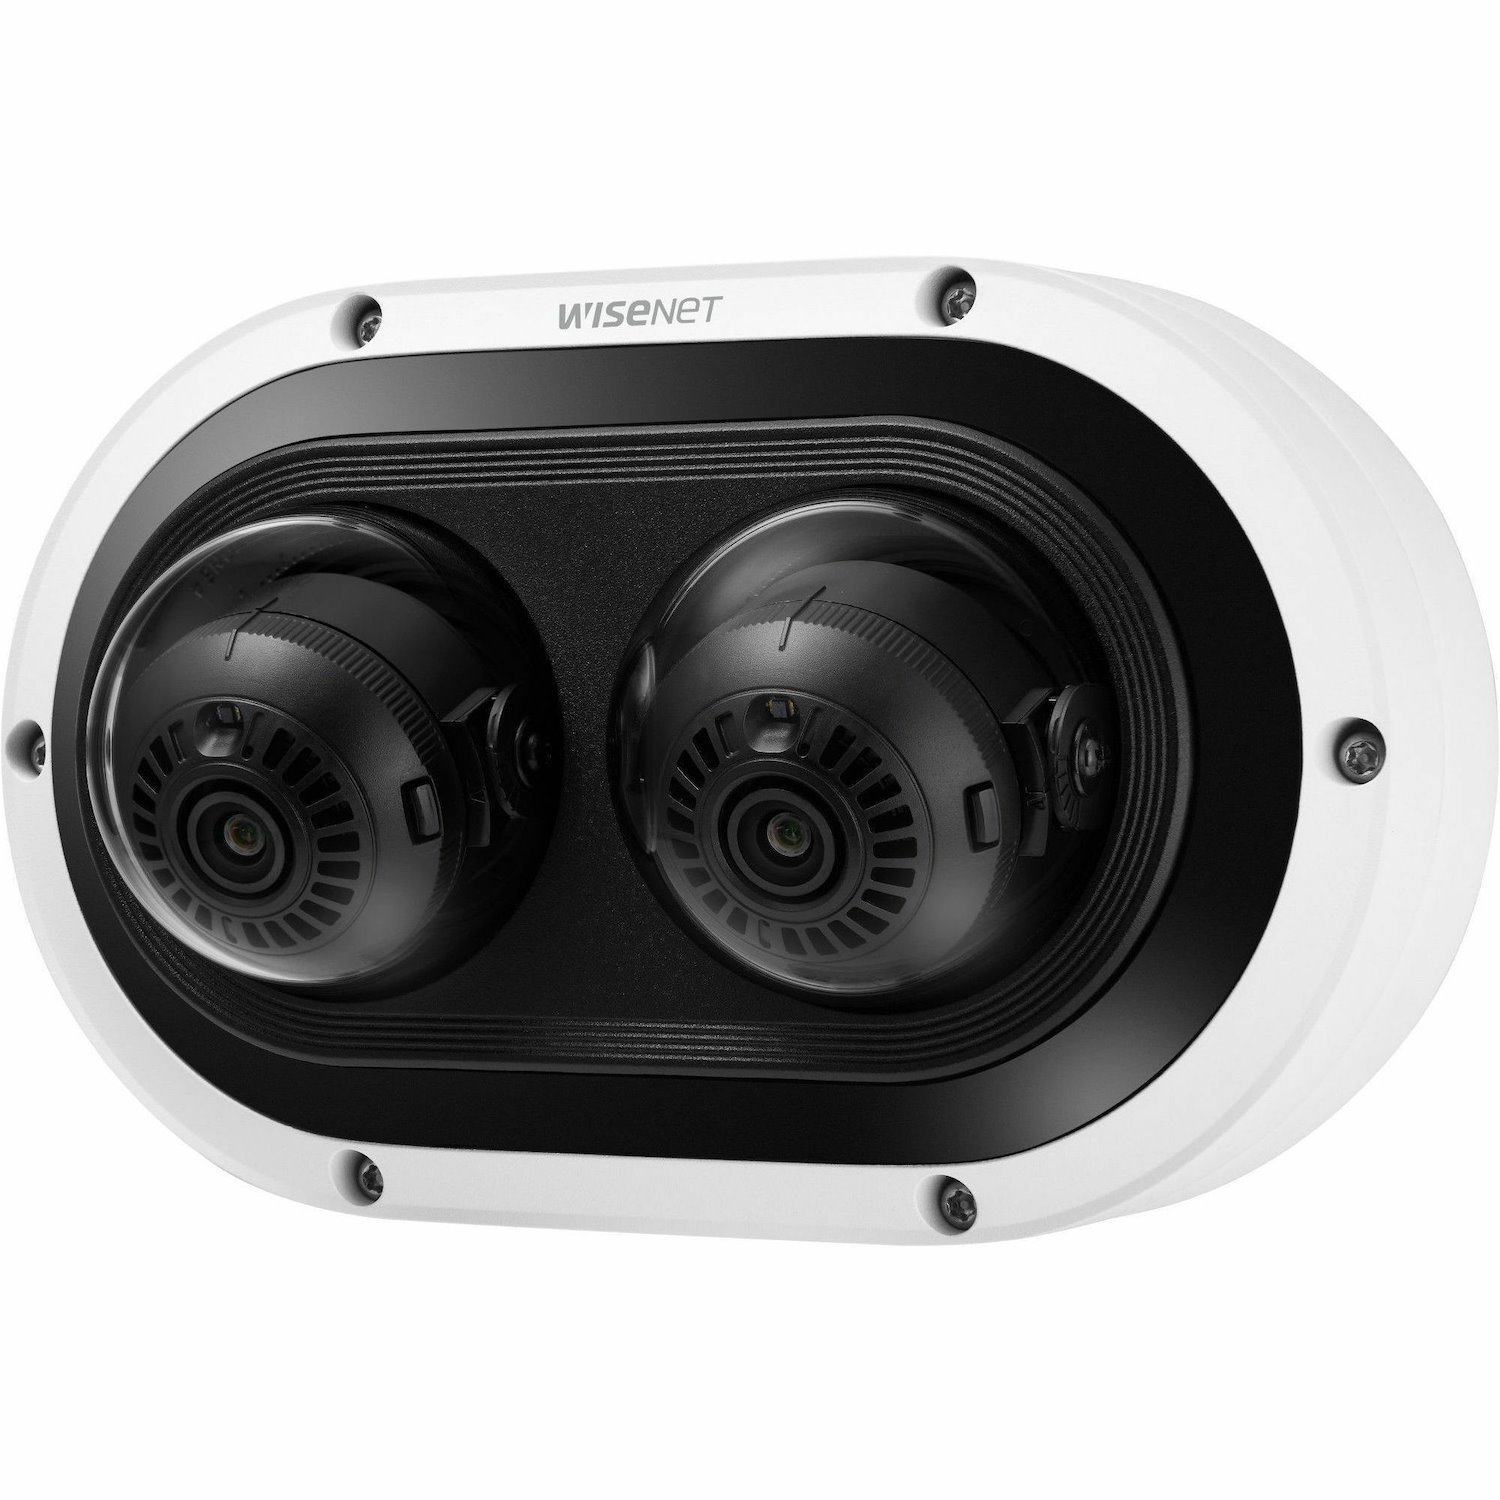 Wisenet PNM-7082RVD 2 Megapixel Outdoor Full HD Network Camera - Color - Dome - White